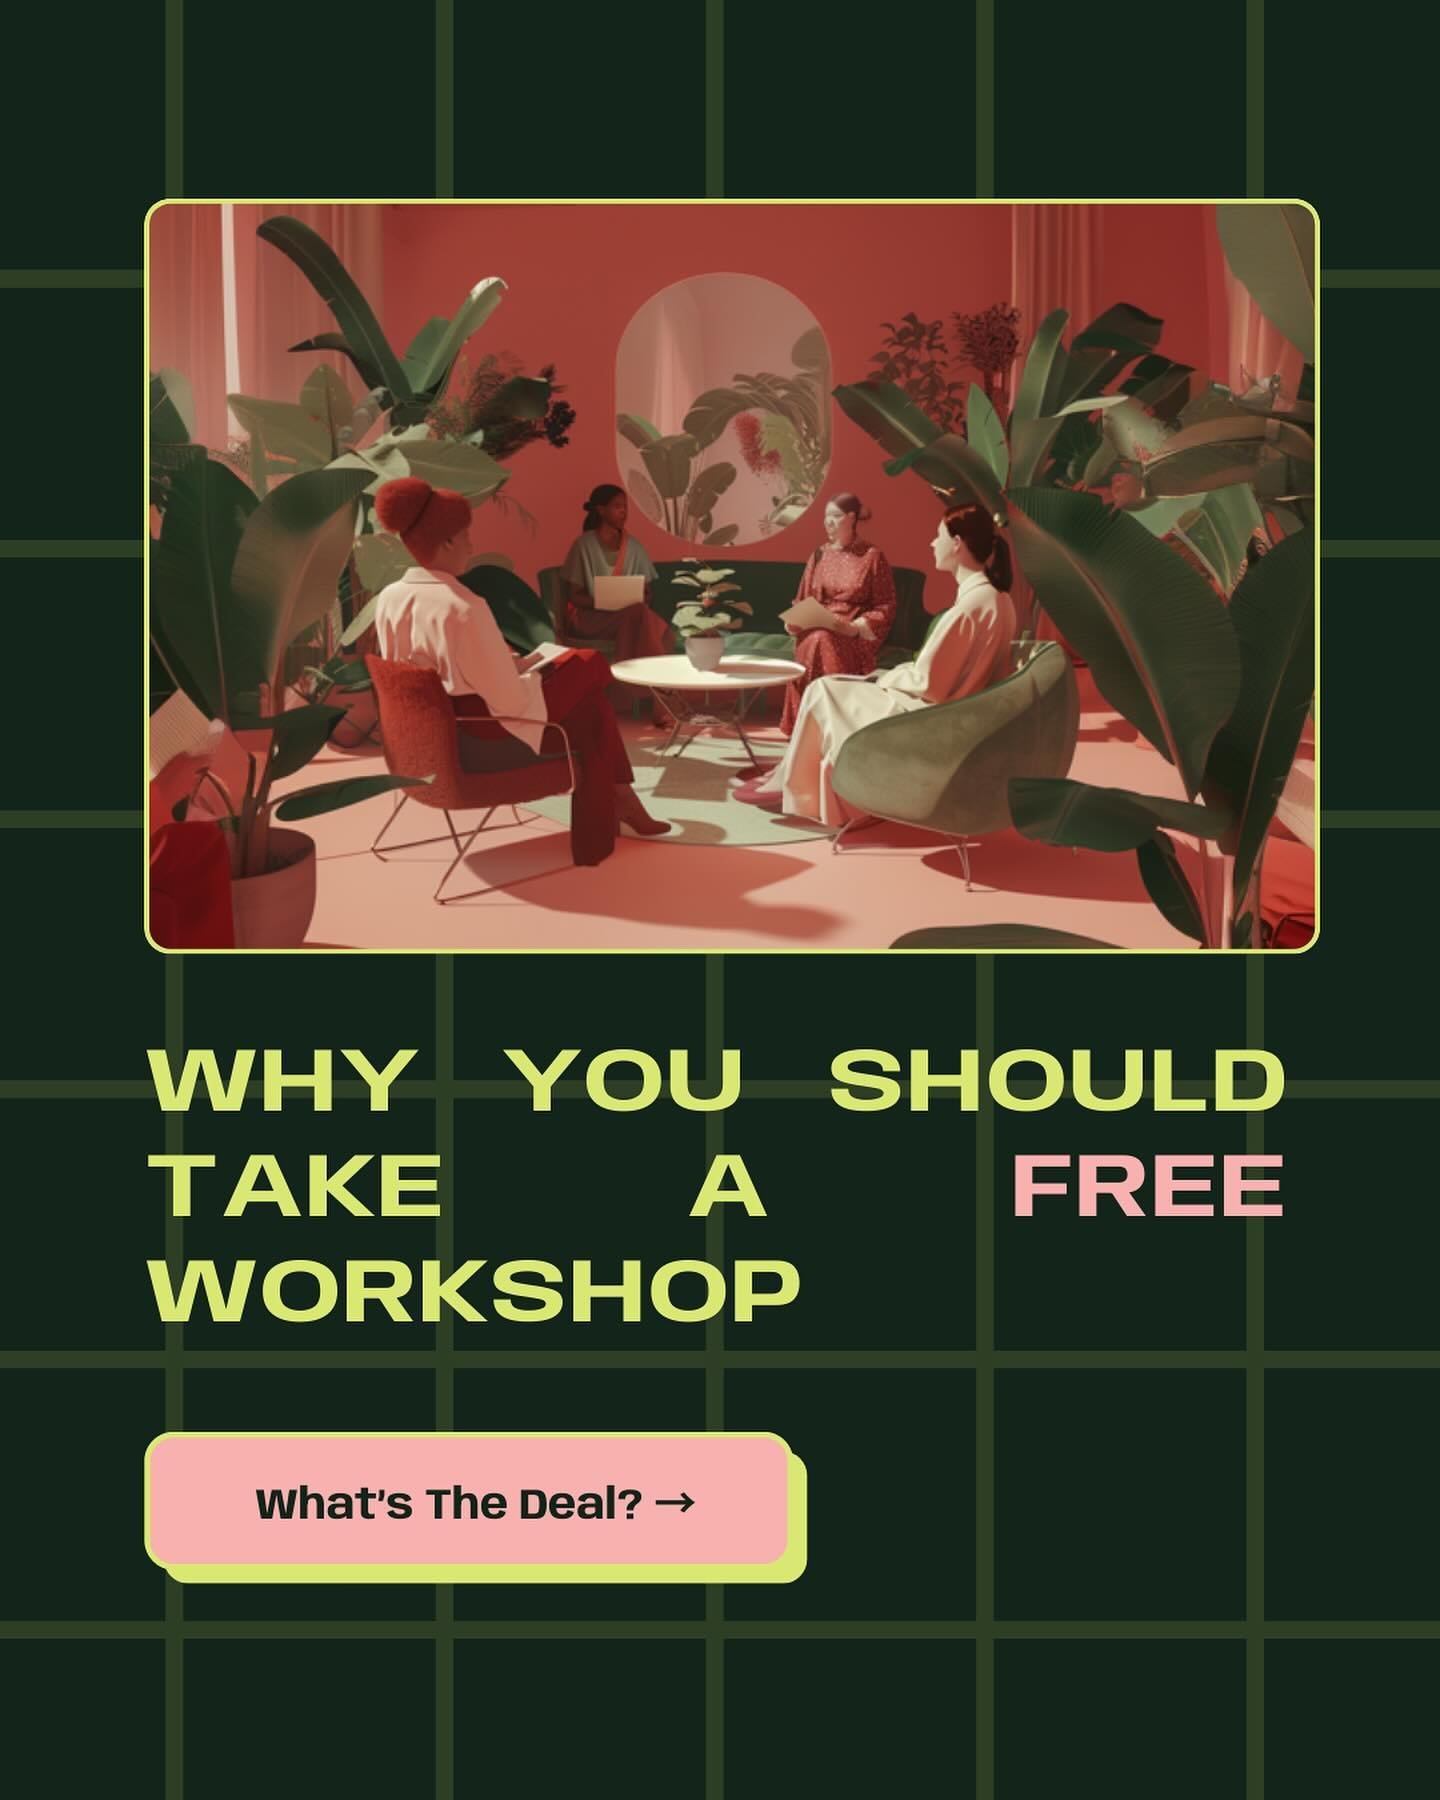 Why you should take a FREE workshop with me! 

Which one sounds good? Comment which workshop you&rsquo;d like to take below ⬇️ I&rsquo;ll dm the link! 

#workshop #workshops #levelup #skills #diybranding #ai #tech #creative